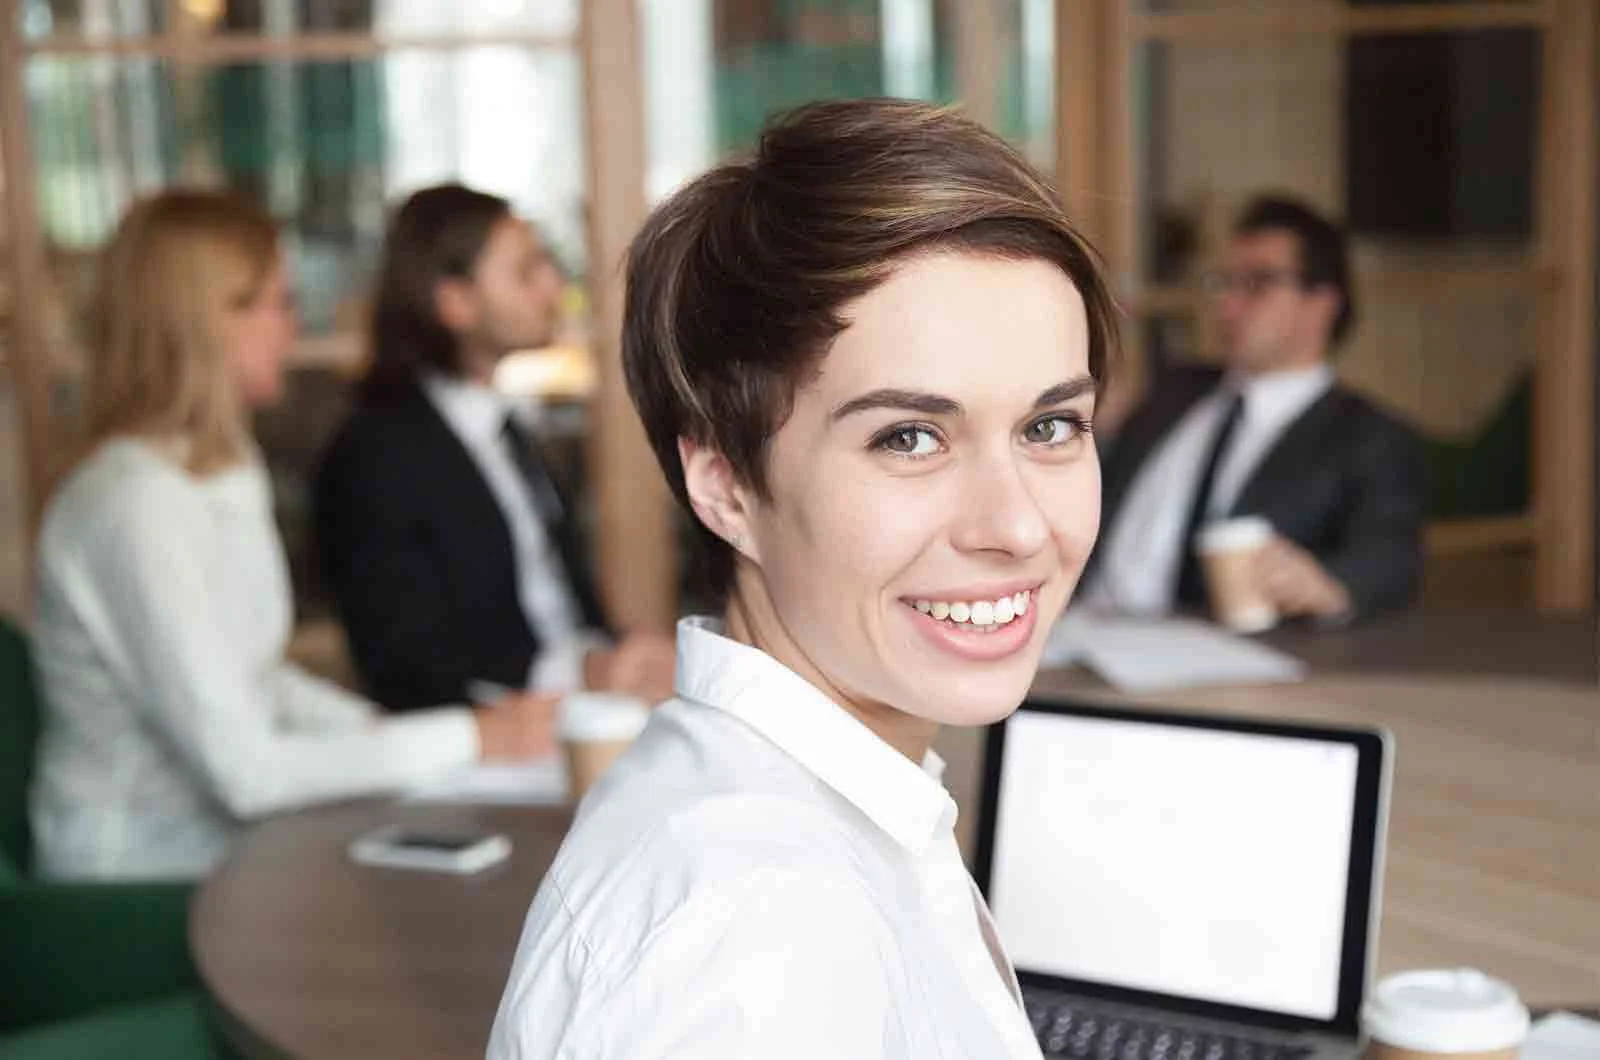 Brown-haired girl smiling with co-workers behind her at a business meeting. Concept of language translation services office.